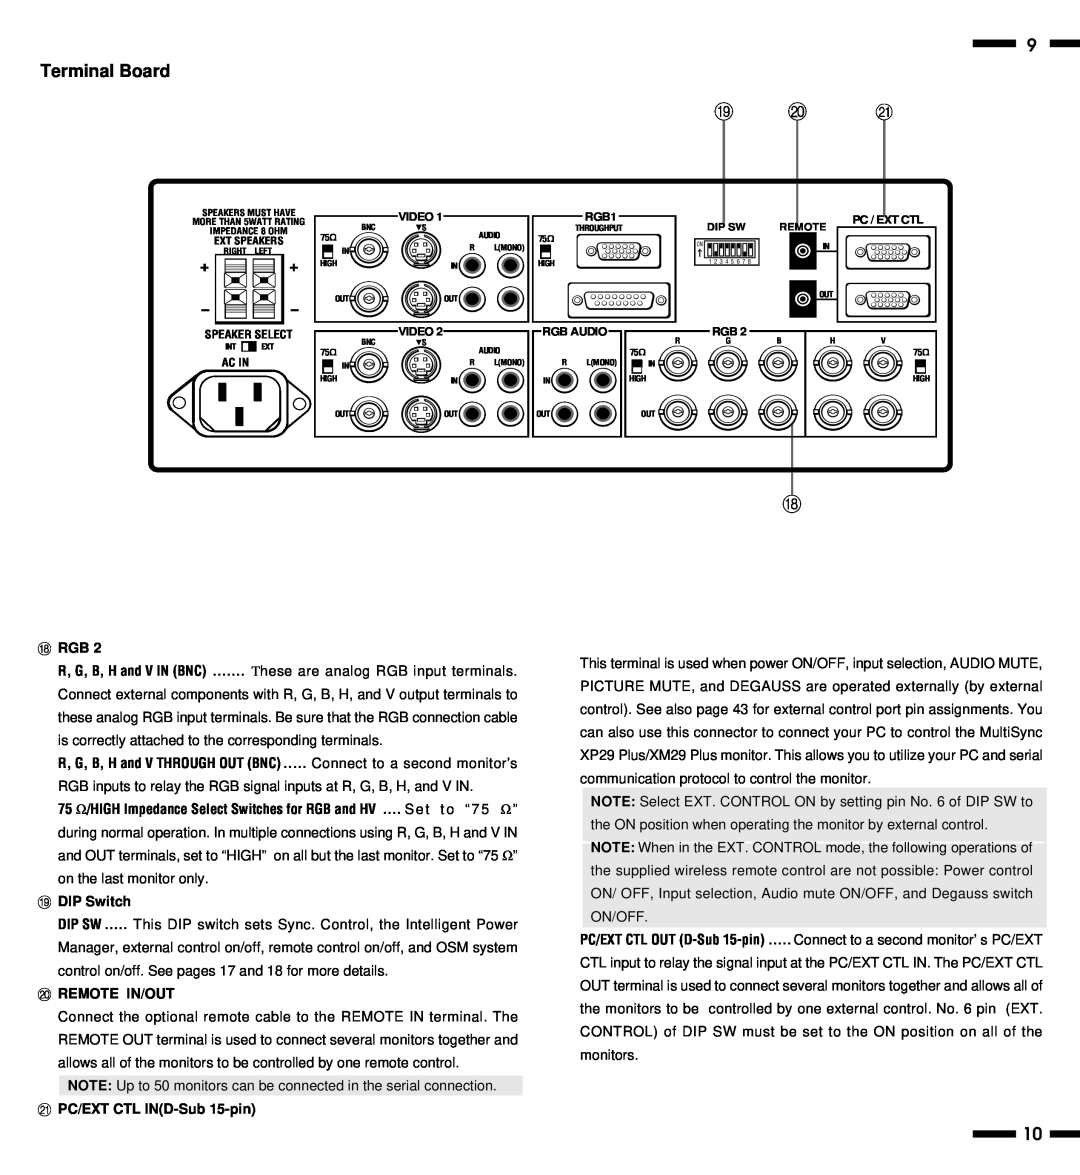 NEC XP29, XM29 Plus user manual I J K, Terminal Board, Hrgb, IDIP Switch, Jremote In/Out, KPC/EXT CTL IND-Sub 15-pin 